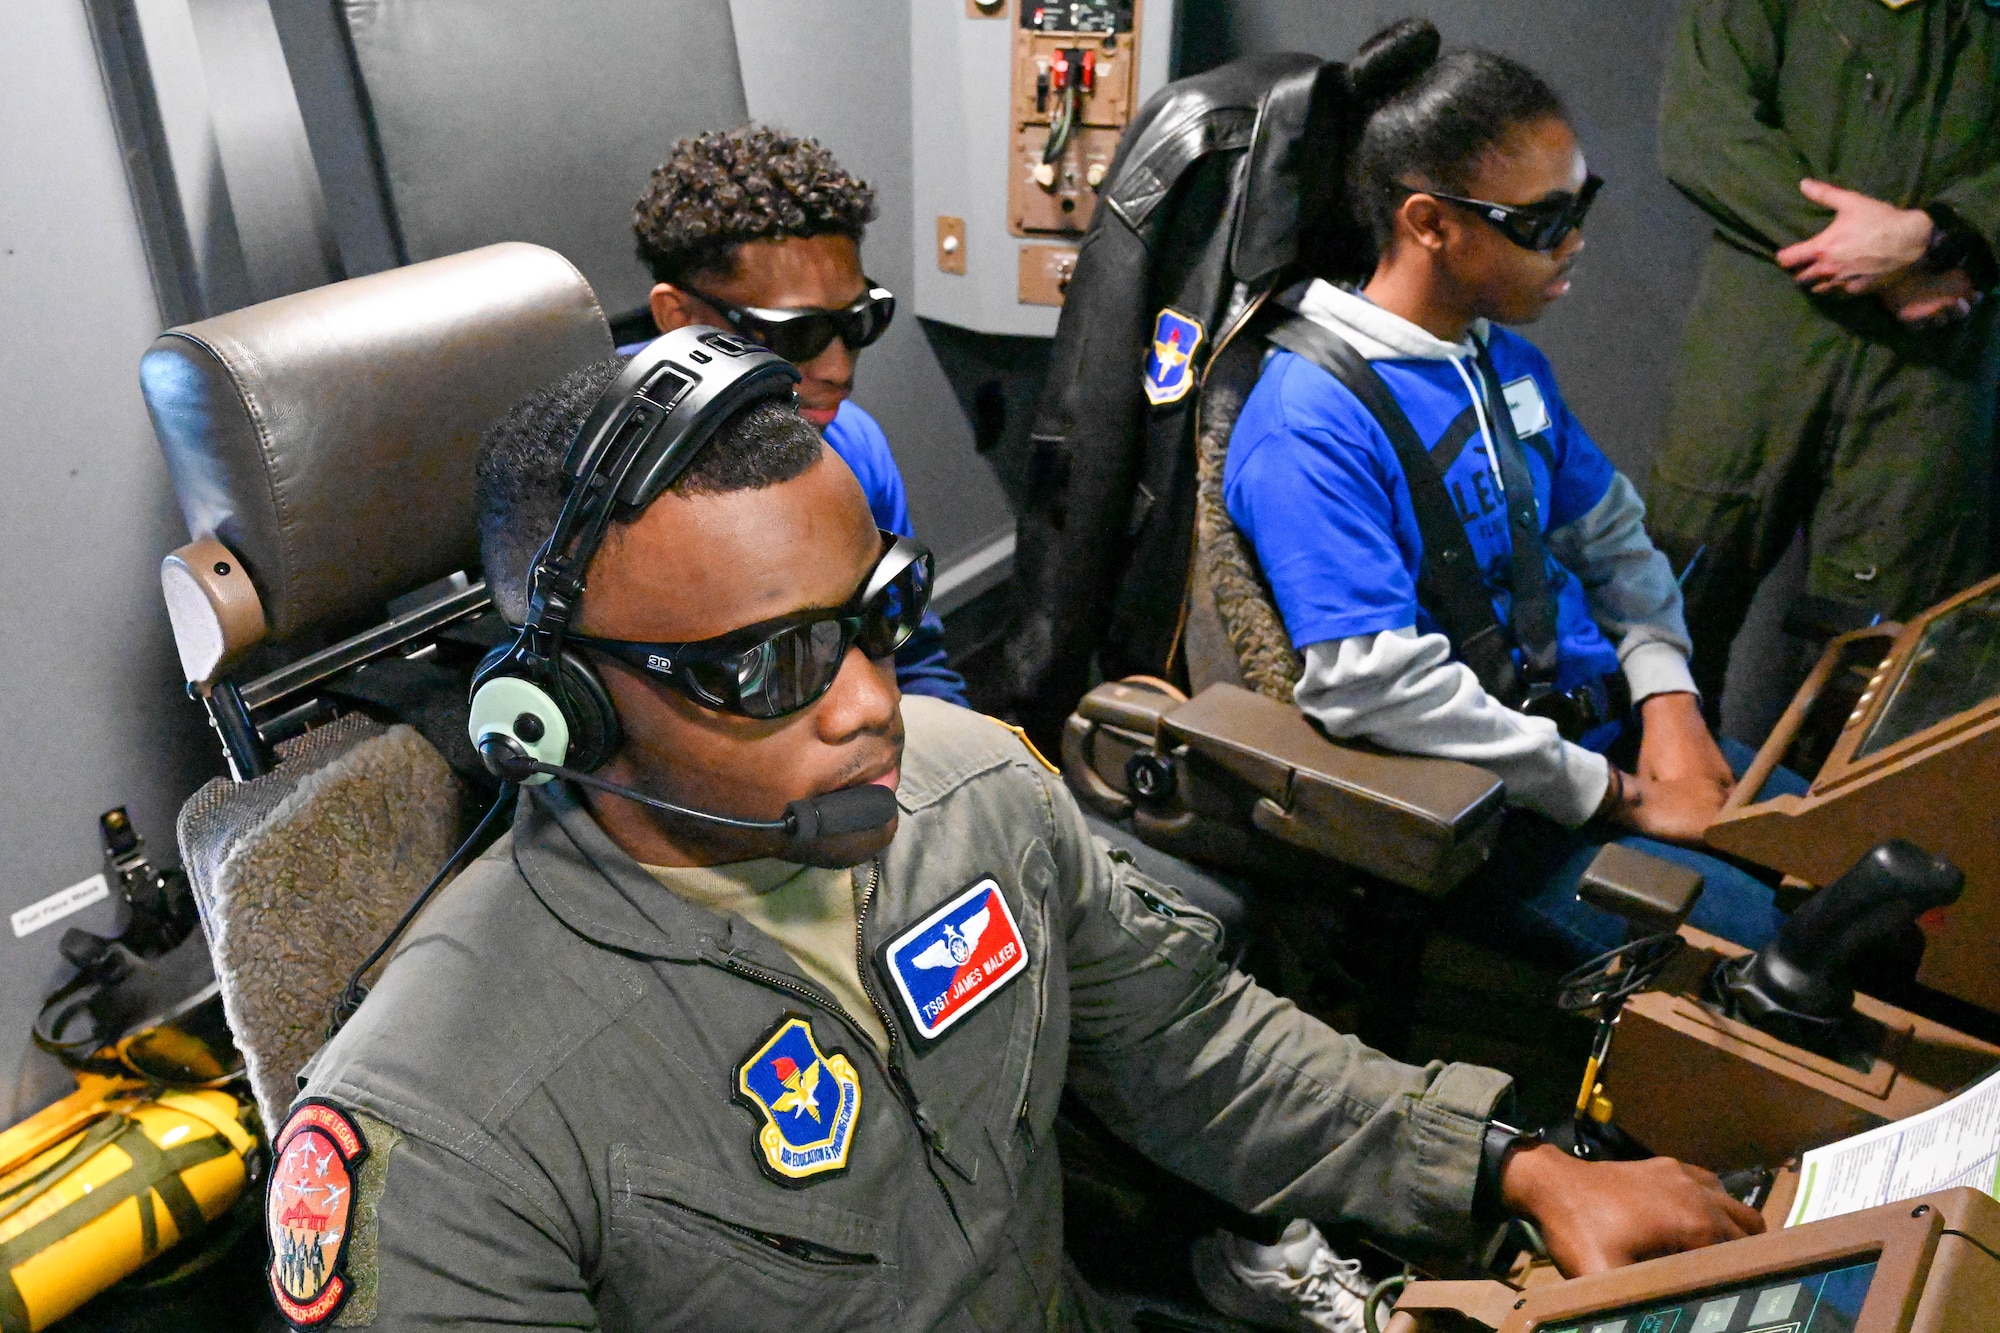 U.S. Air Force Tech. Sgt. James Walker, 56th Air Refueling Squadron boom operator instructor, shows a 3D display to Legacy Flight Academy students at Joint Base Charleston, South Carolina, Feb. 18, 2023. Local elementary, middle and high school students spent the day touring various Air Force aircraft and flying in Civil Air Patrol and U.S. Air Force aircraft. (U.S. Air Force photo by Senior Airman Trenton Jancze)